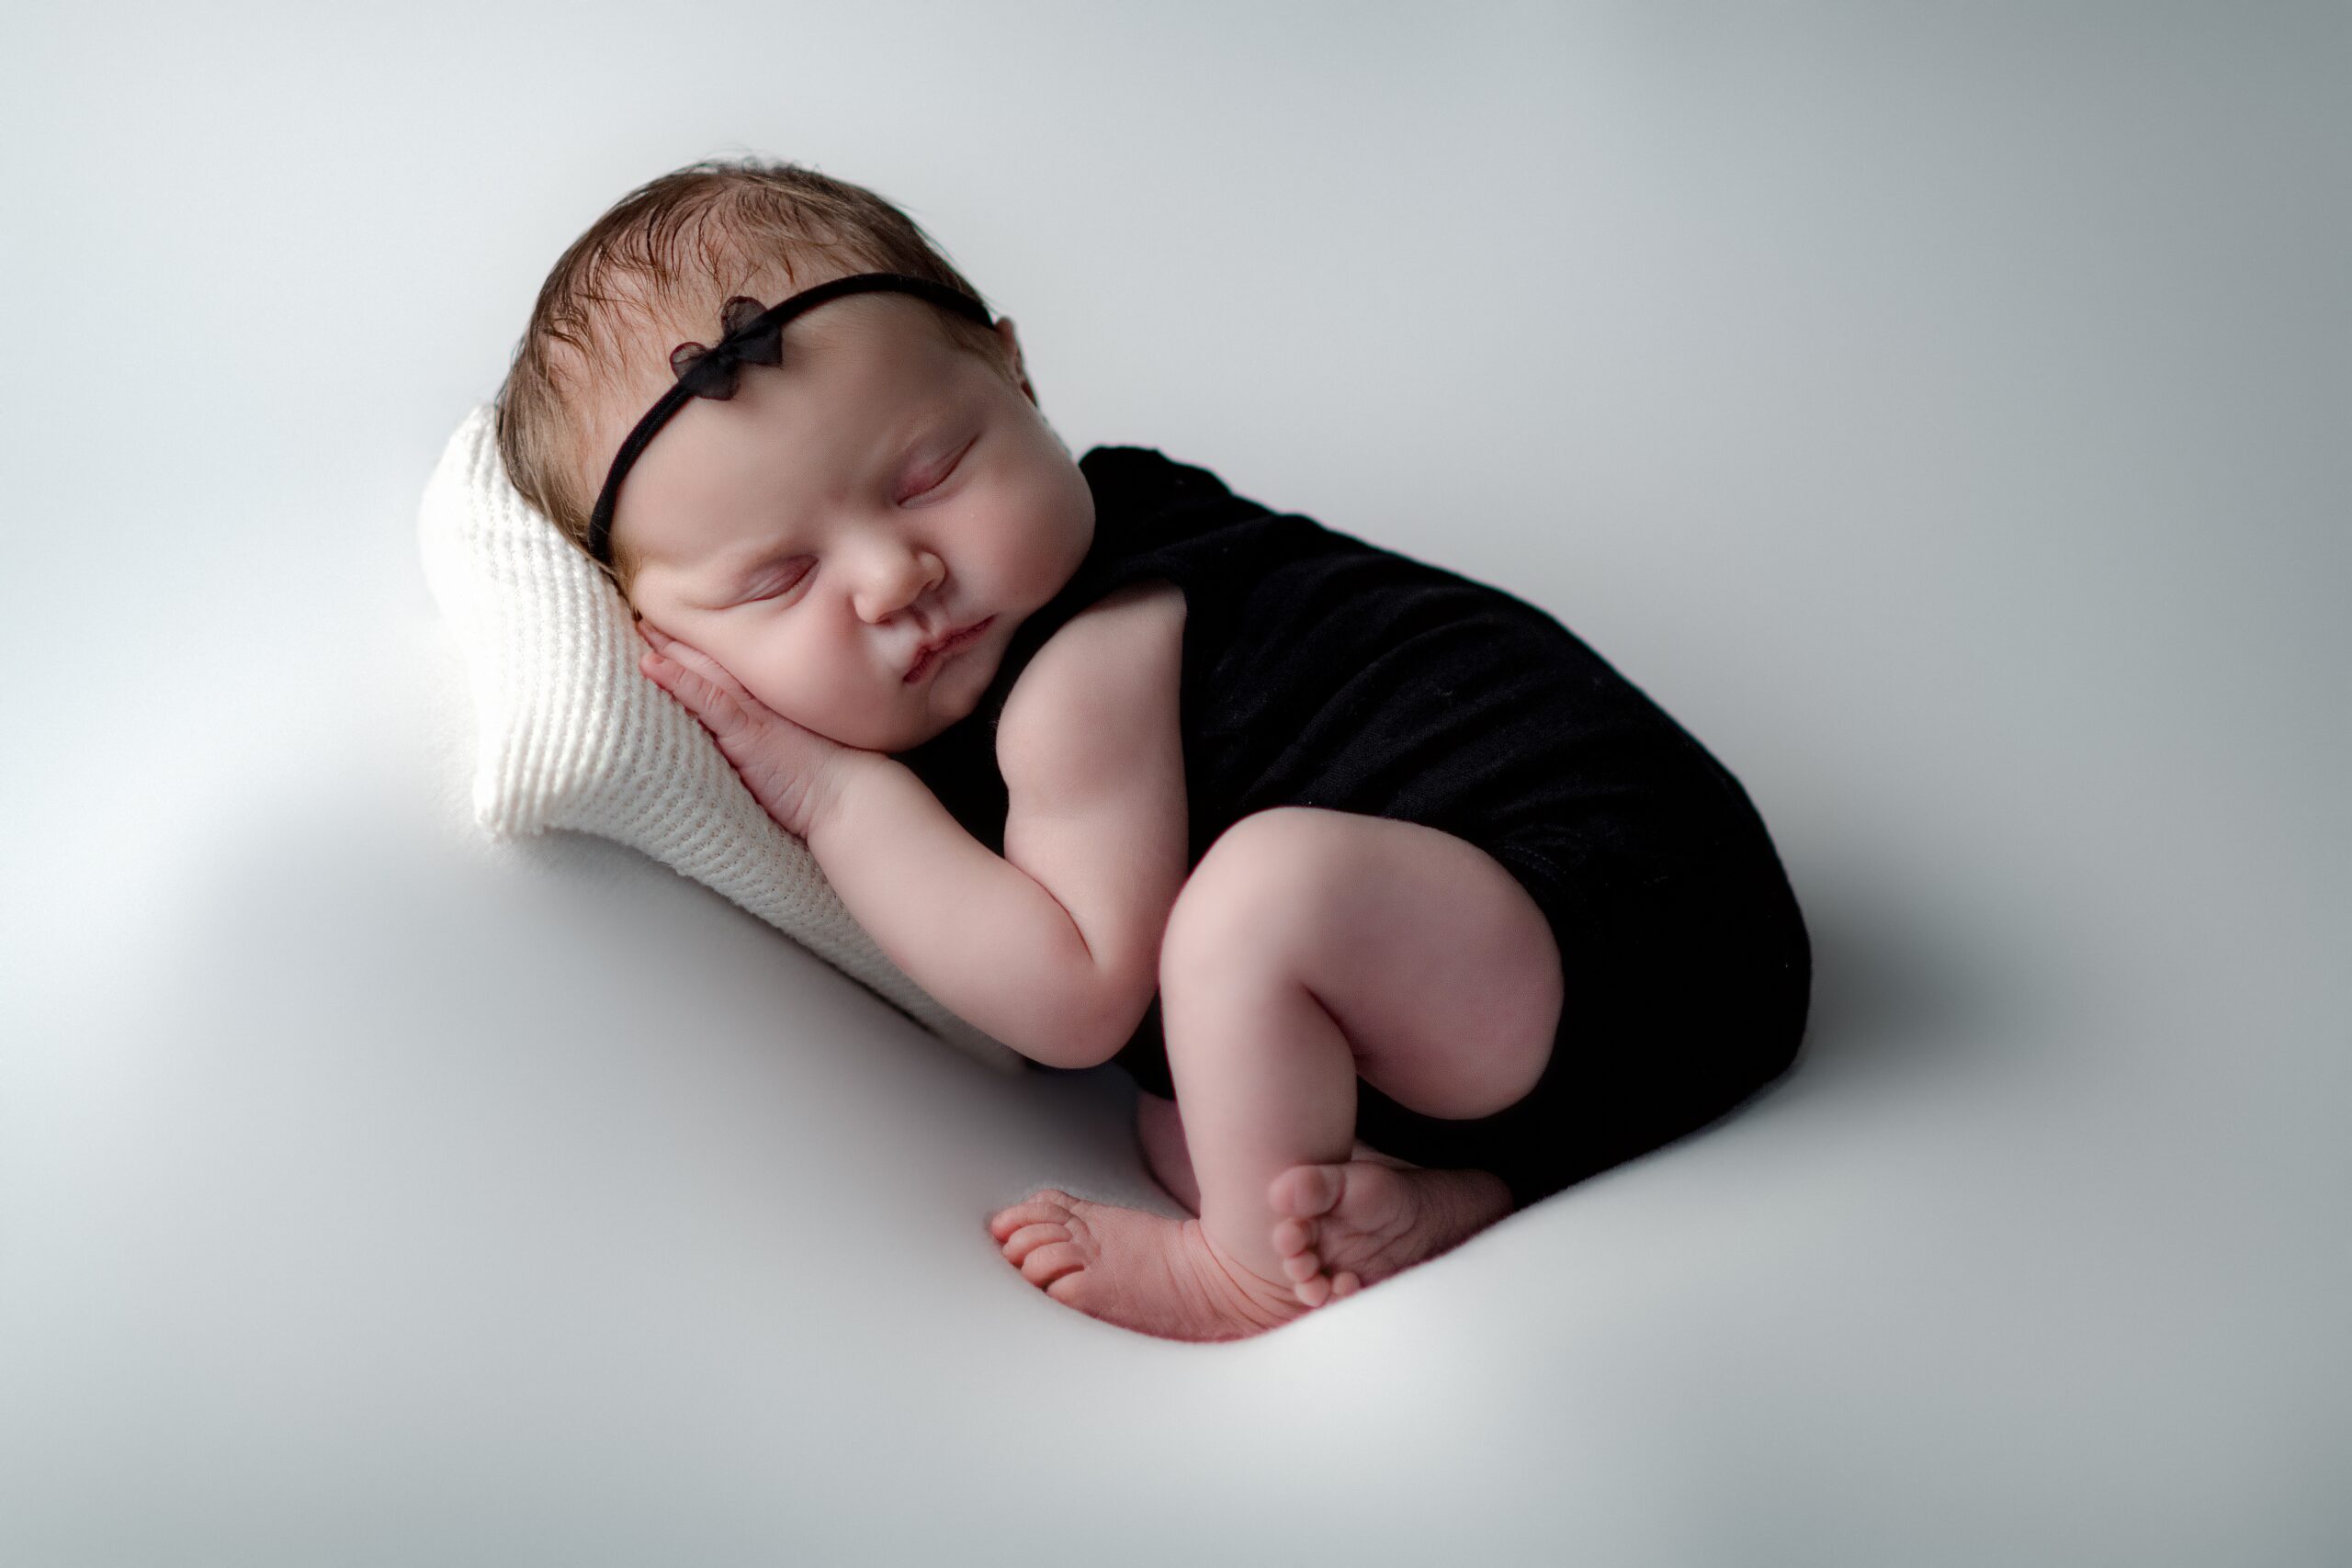 Newborn photography by Lisa Rowland At Perfect-photos.com in Studio